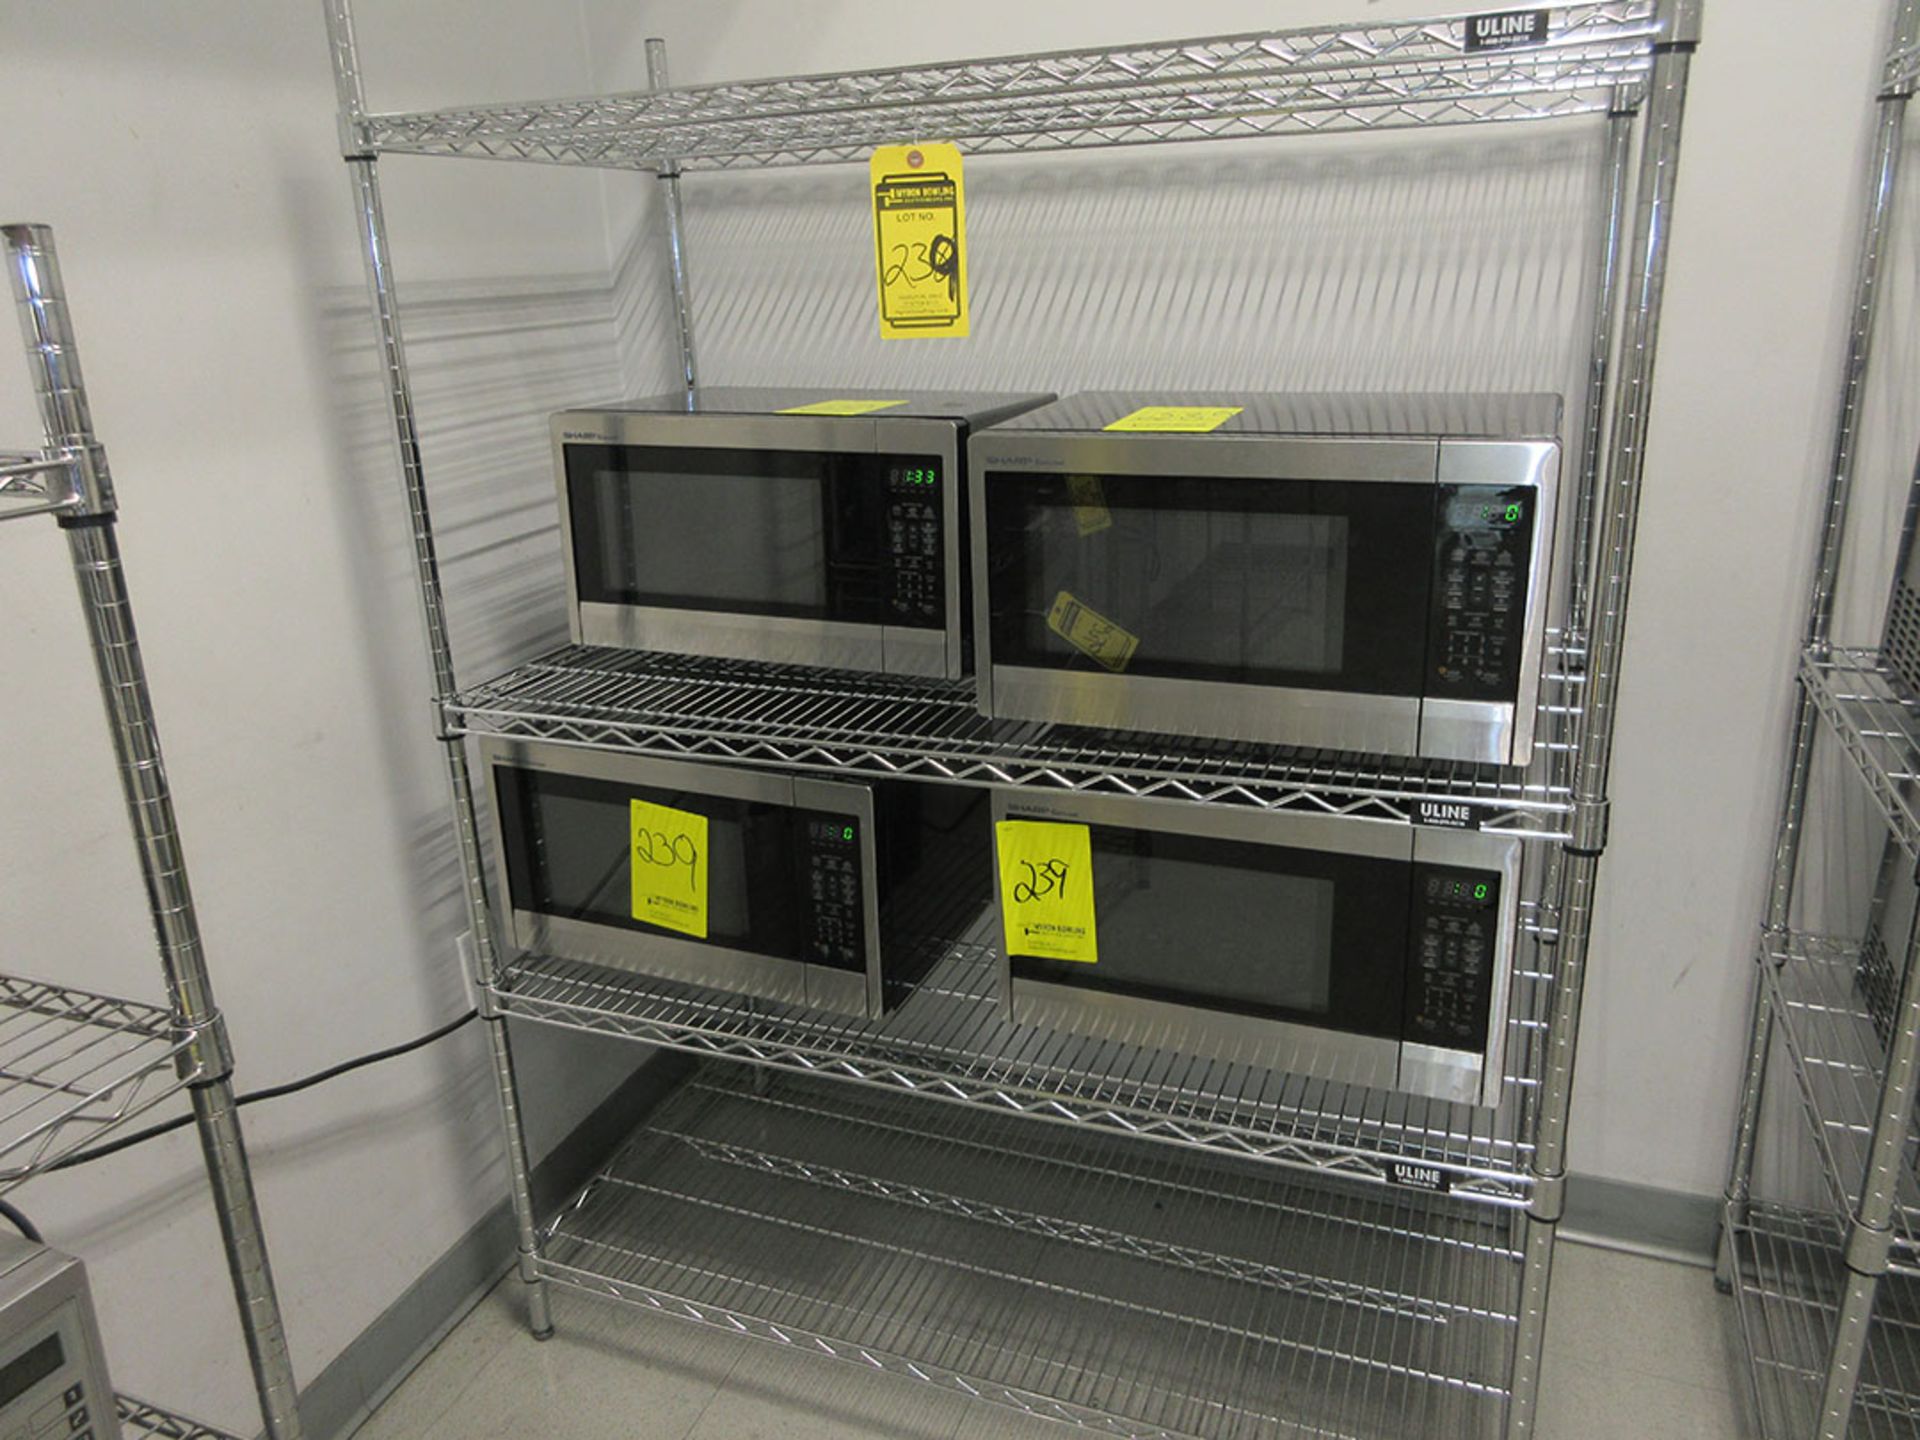 (4) SHARP COMMERCIAL MICROWAVES